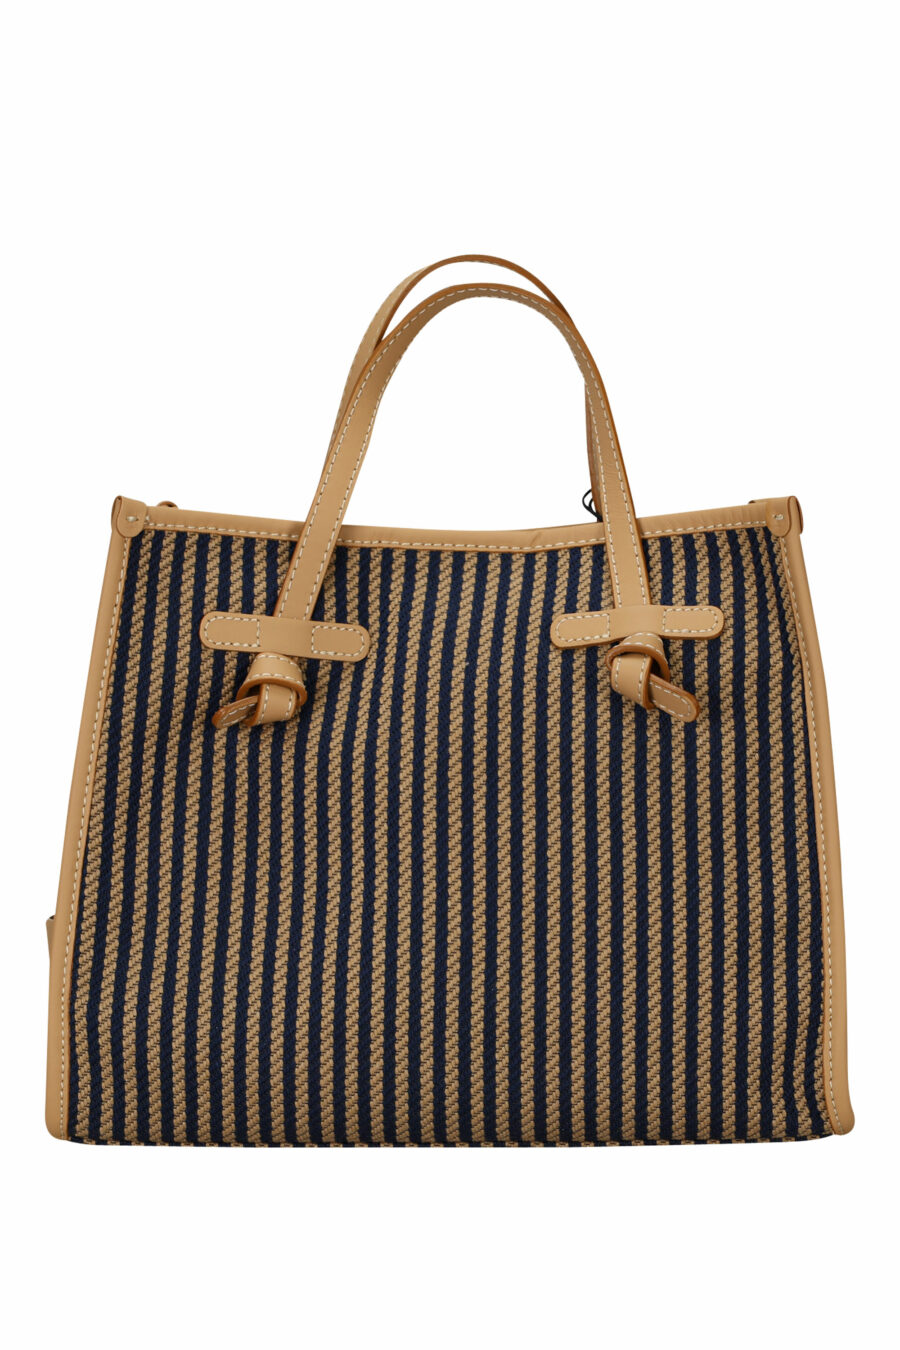 Miss Marcella" mini shopper bag in pink with blue lines and mini logo - 8057145894324 2